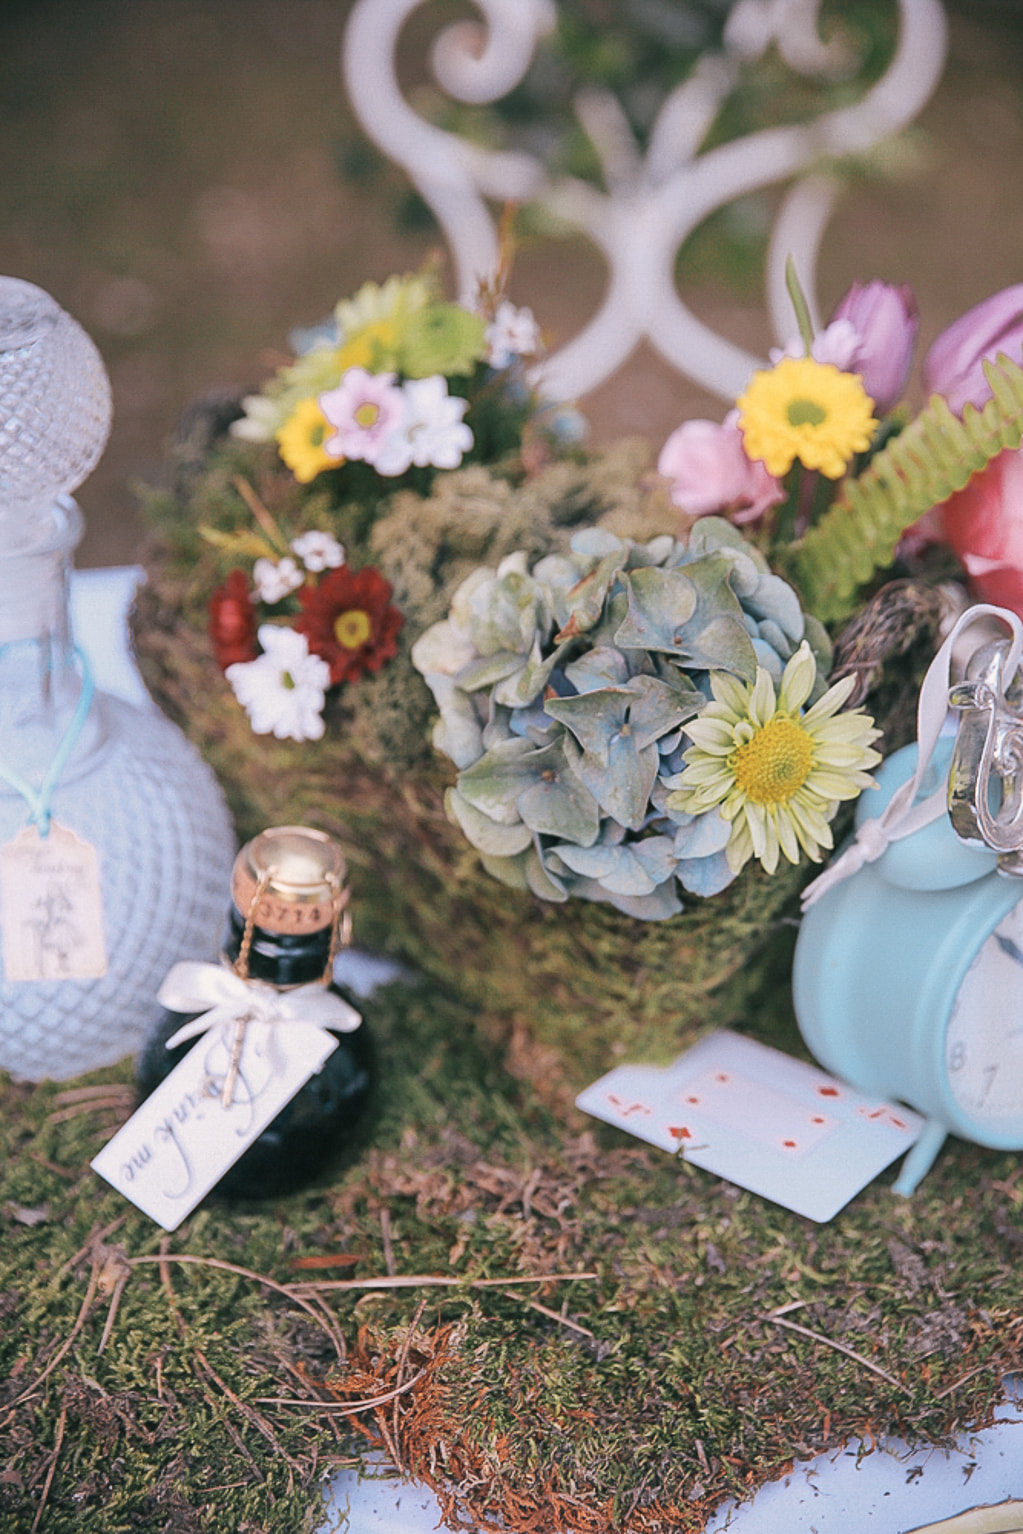 Alice in wonderland themed bridal shower inspiration and hen party ideas by The Belle Blog 